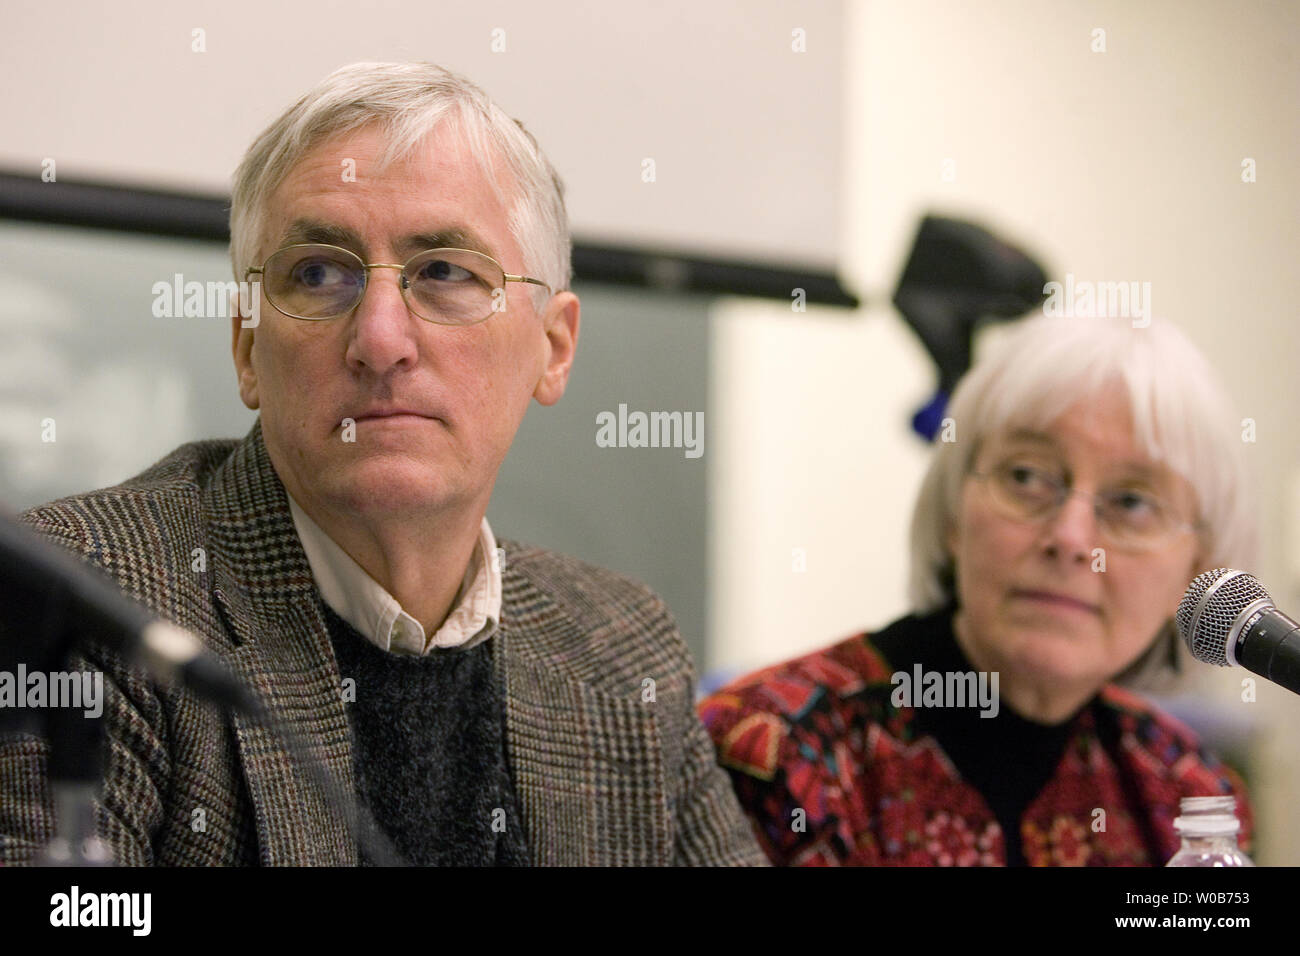 Rachel Corrie's parents Craig (L) and Cindy from Olympia, Washington are guests at Simon Fraser University Harbor Centre in Vancouver British Columbia, February 3, 2008, where they discuss the play 'My Name Is Rachel Corrie' about their daughter who was crushed to death by an Israeli Defense Forces bulldozer in the Gaza strip March 2003 while volunteering with the International Solidarity Movement. The 70-minute one woman show compiled and edited by actor Alan Rickman and Gaurdian journalist Katharine Viner successfully premiered at the Royal Court in London and is being performed in Montreal Stock Photo